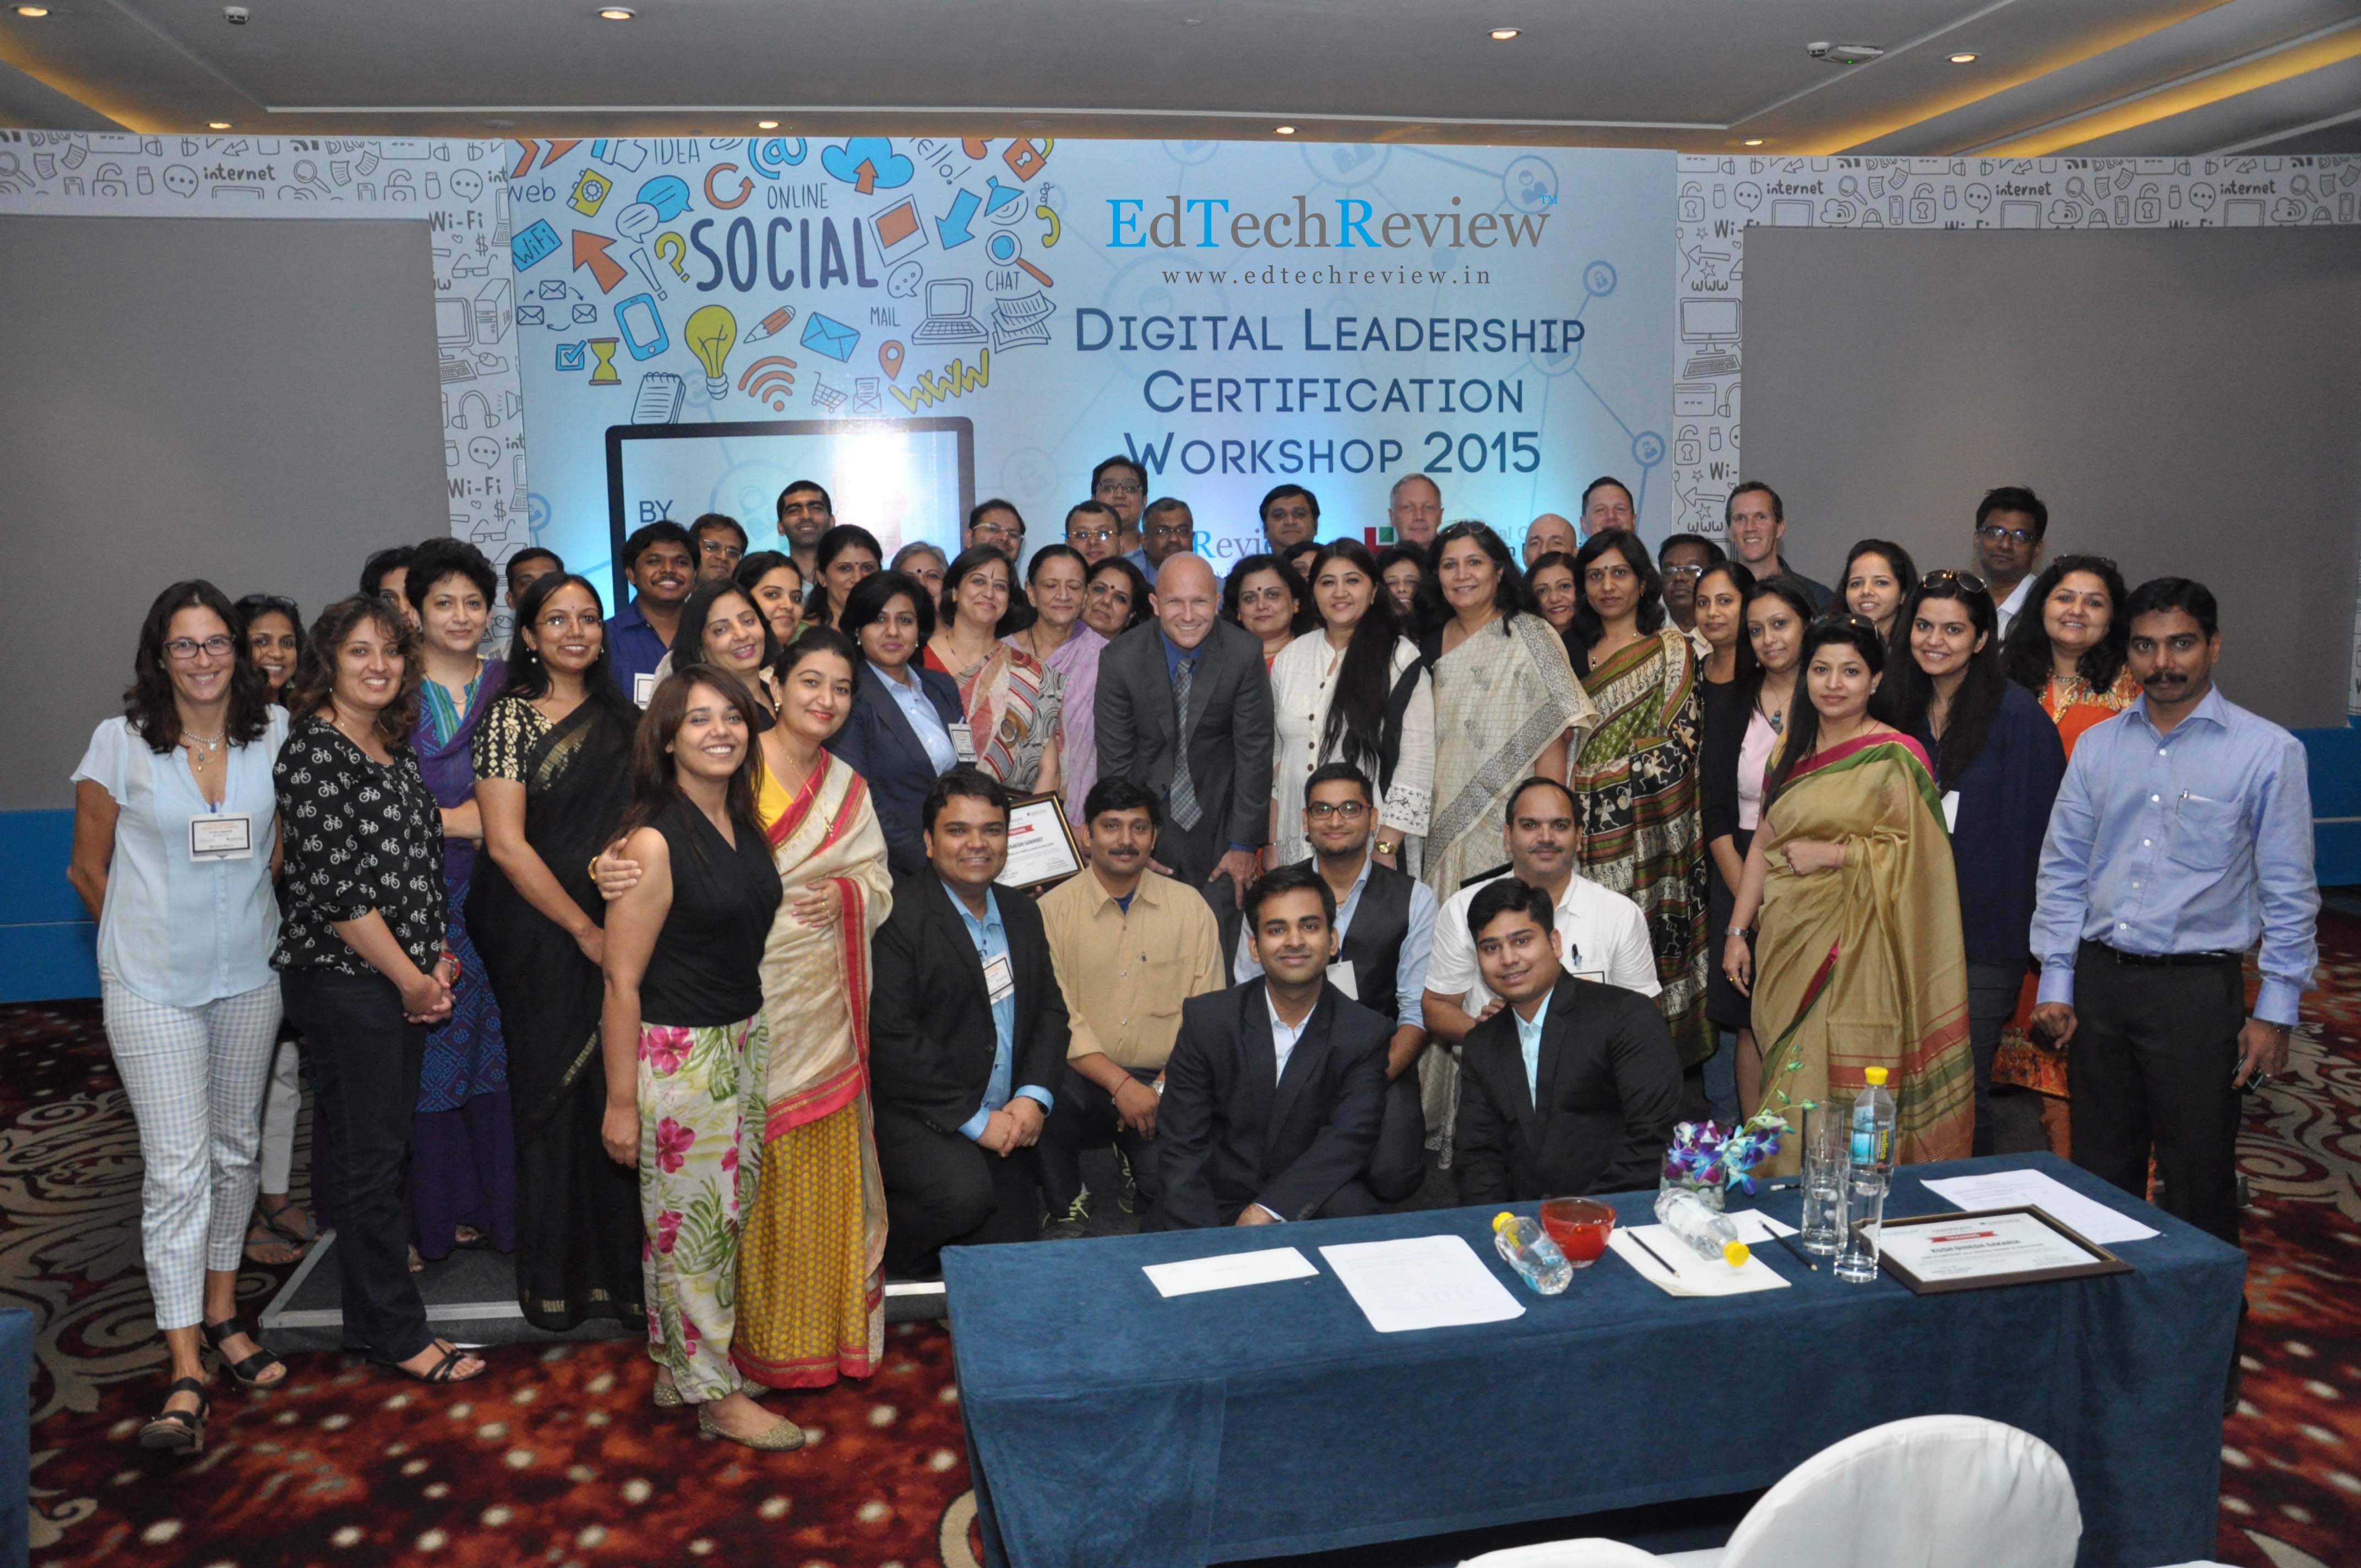 Edtechreview Trained & Certified the First Batch of "digital Leaders in Education"